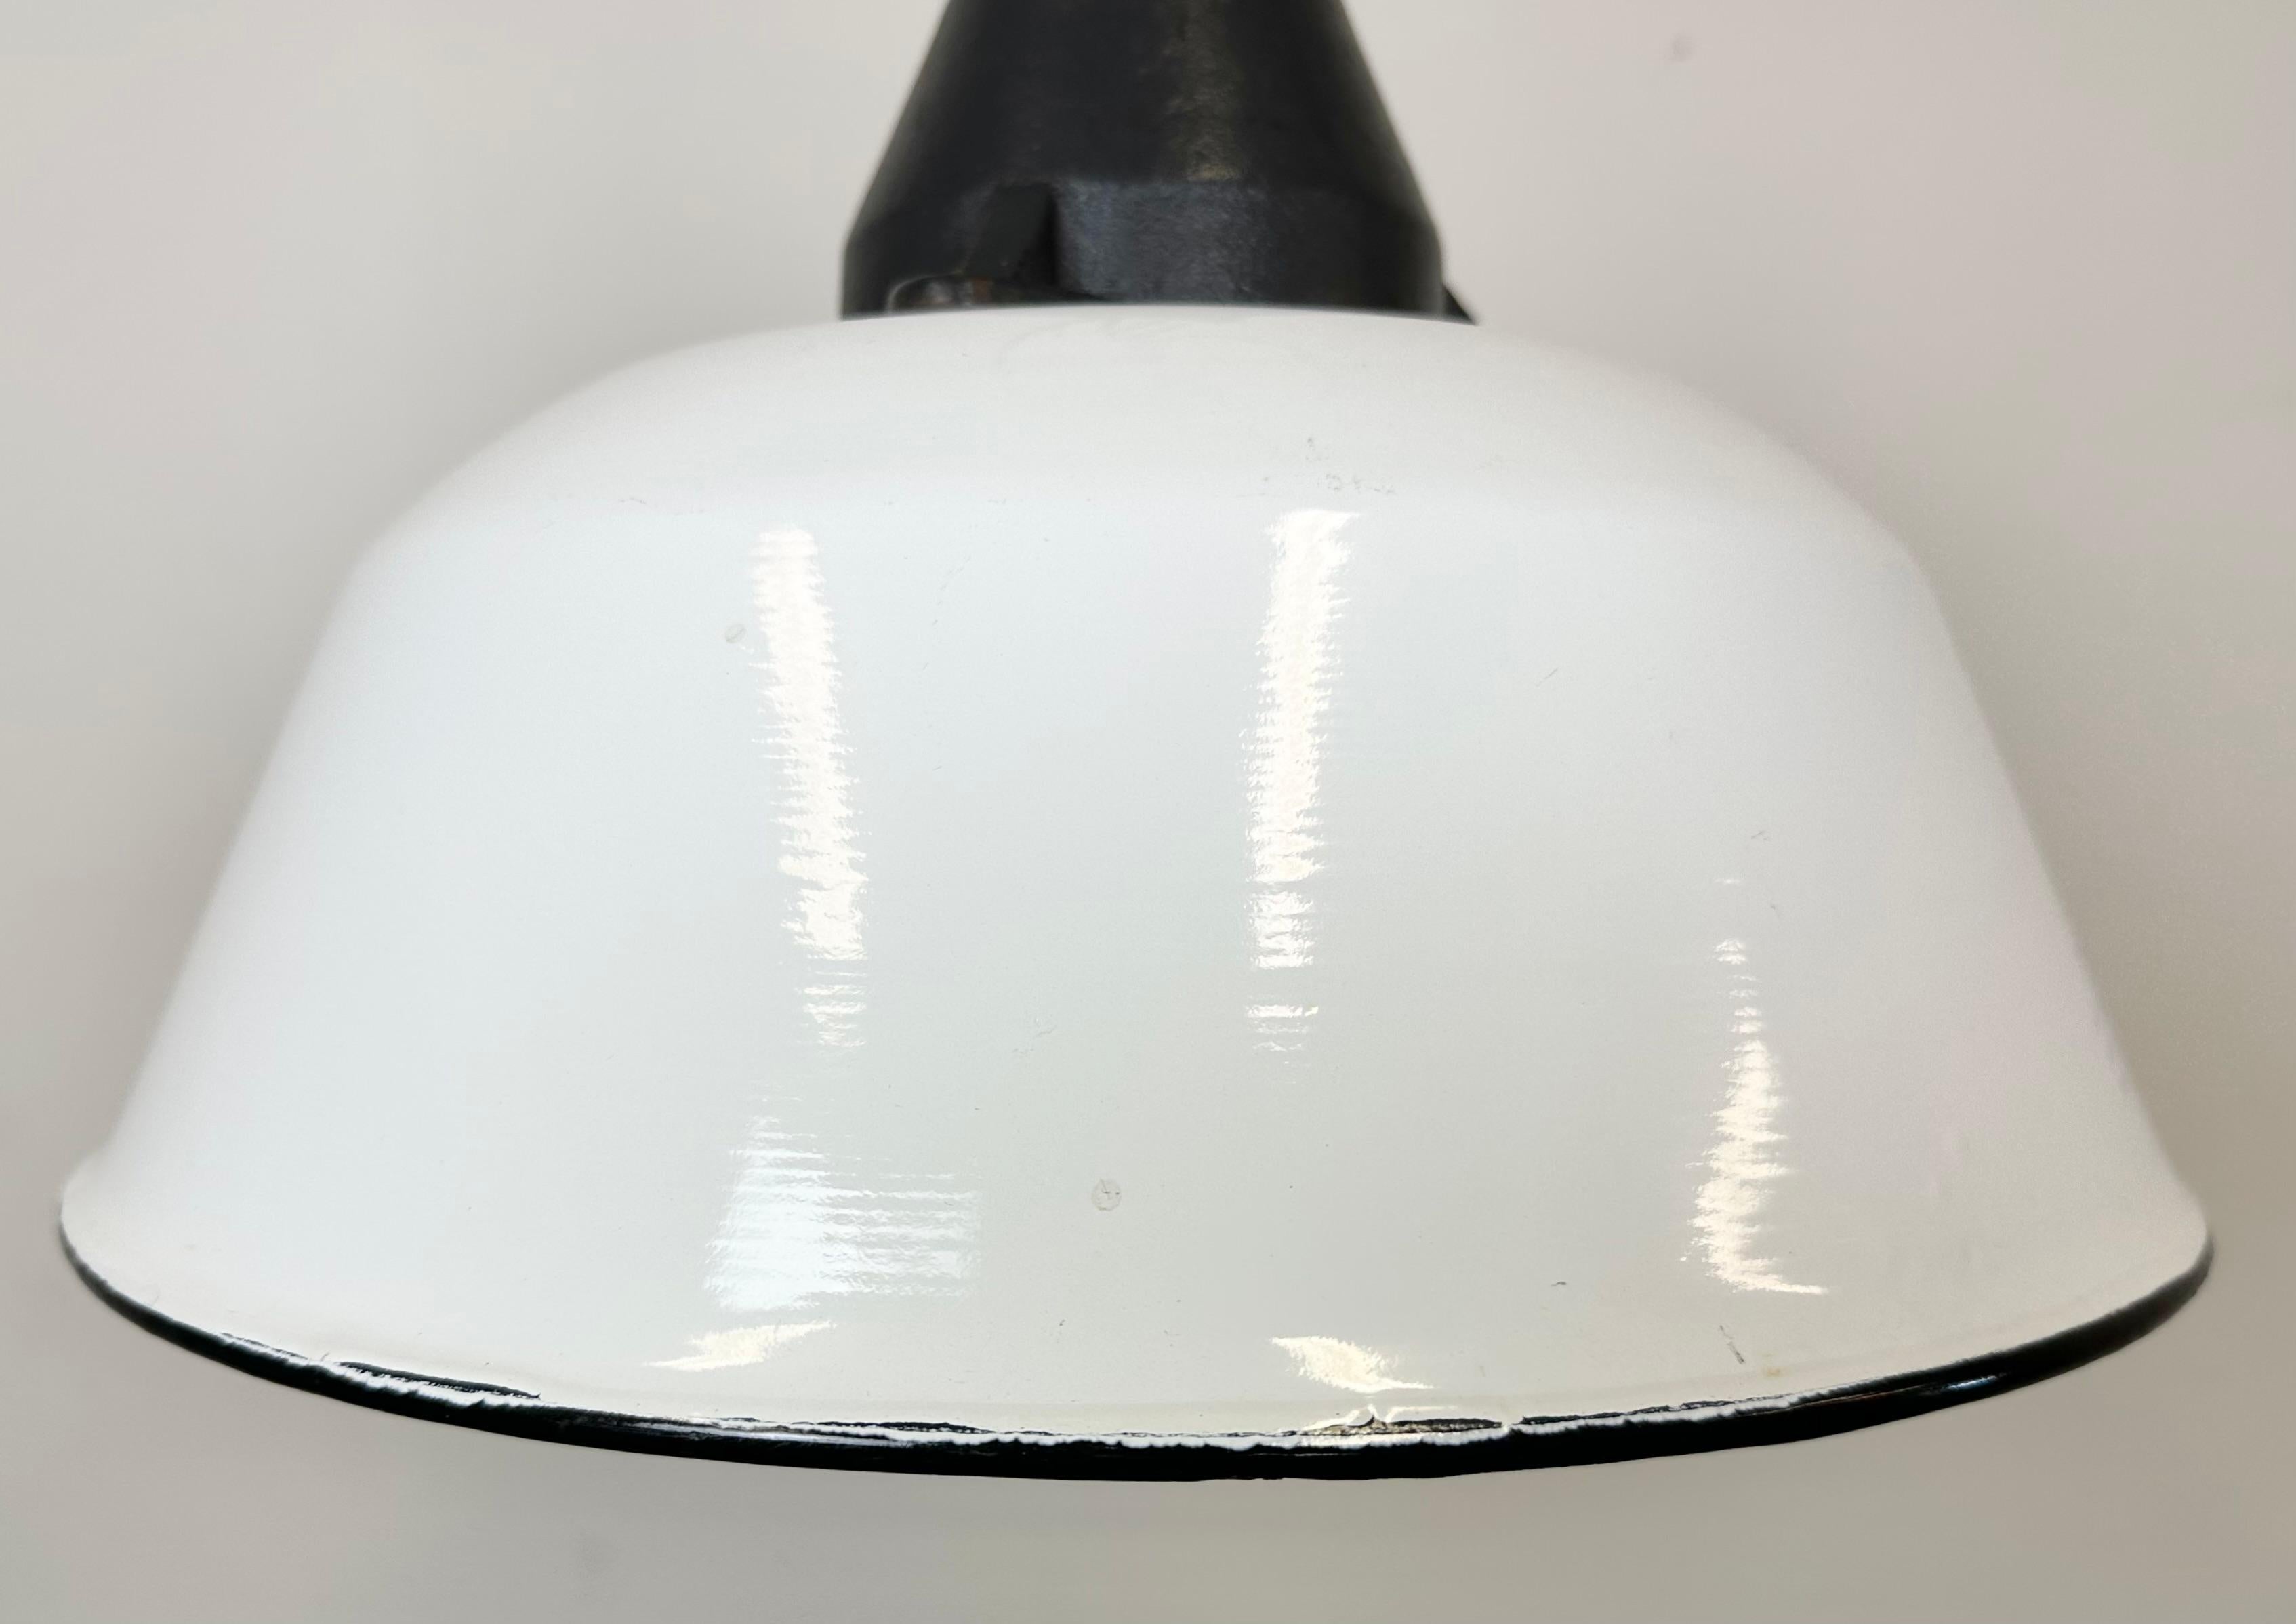 White Enamel and Cast Iron Industrial Pendant Light with Glass Cover, 1960s For Sale 1